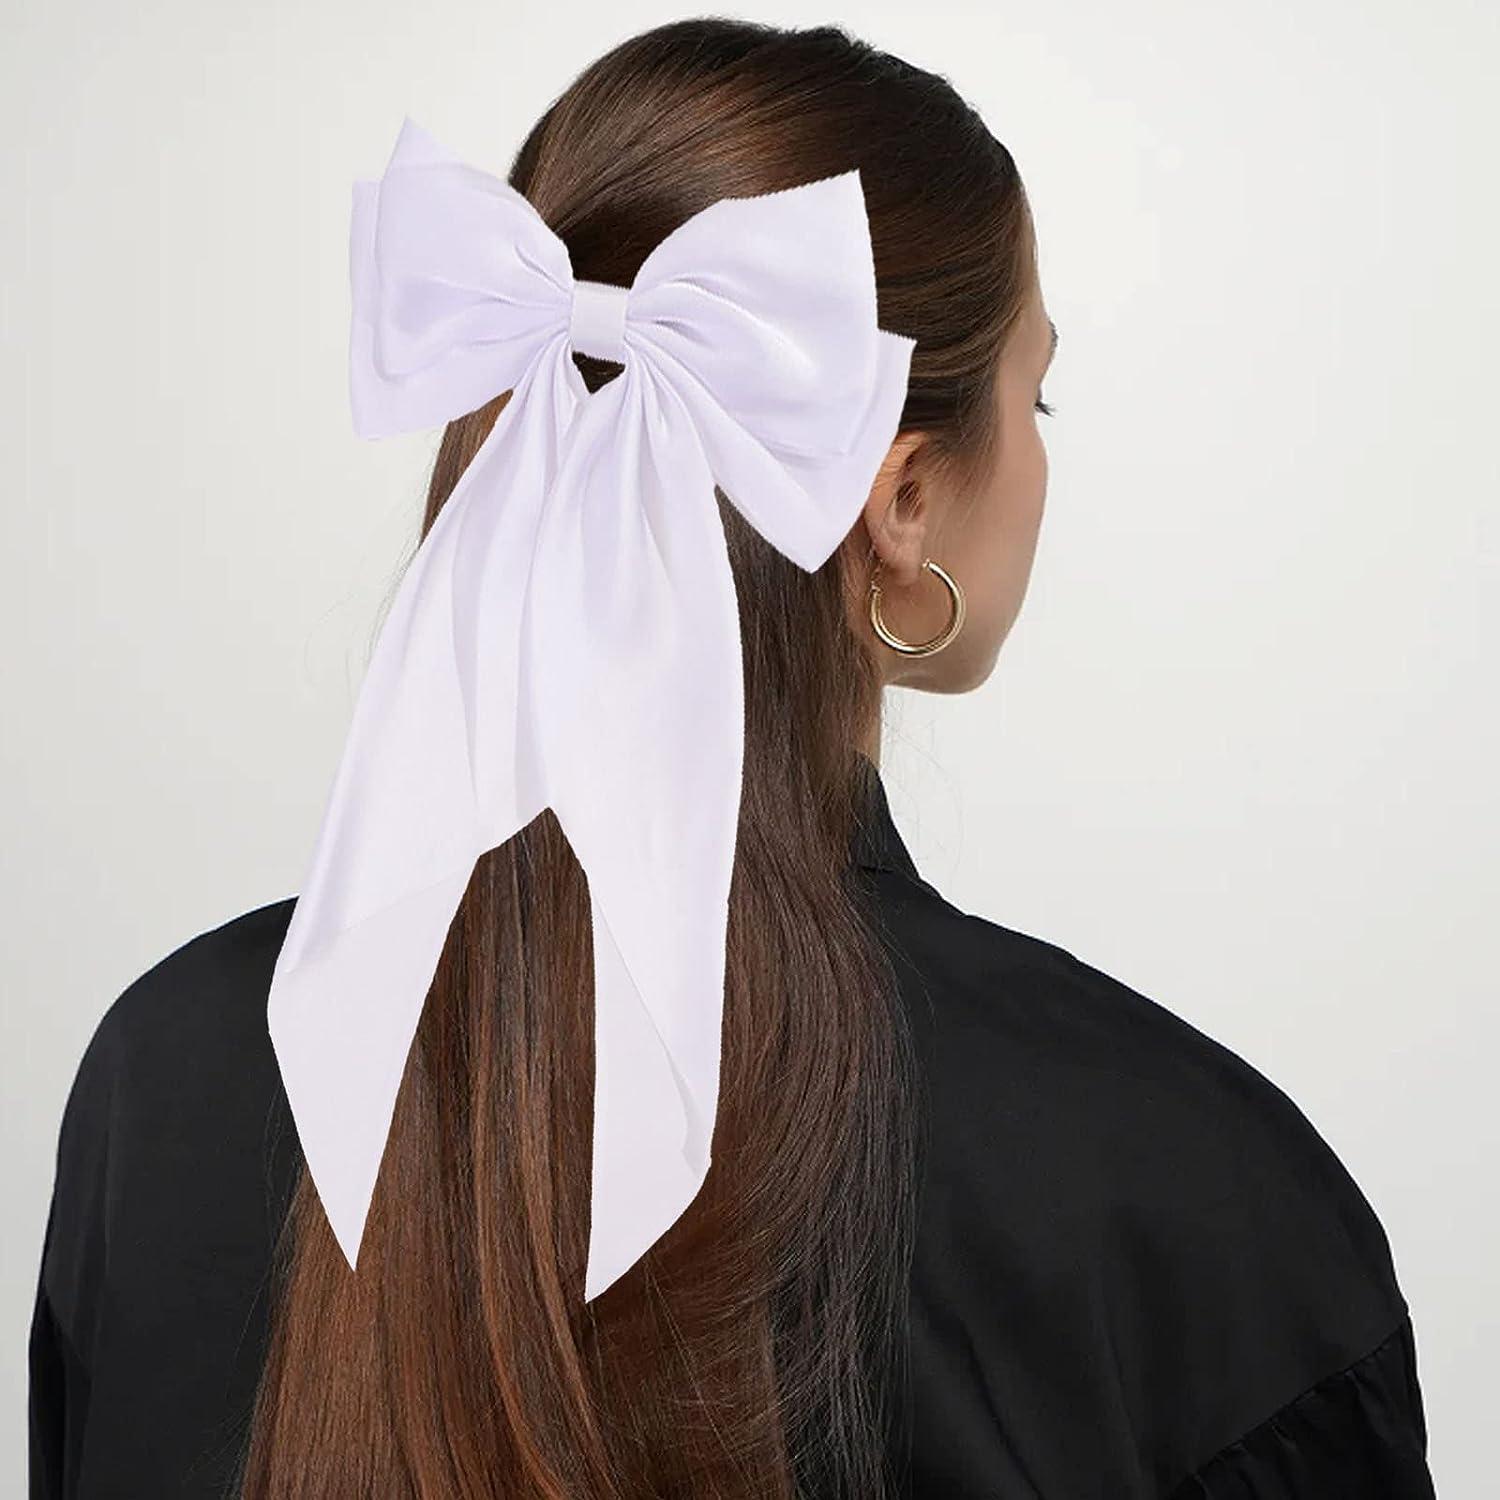  Black Hair Bows for Women - 2Pcs Silkly Satin Hair Ribbon Bow  with Metal Clips Hair Accessories for Girls : Beauty & Personal Care